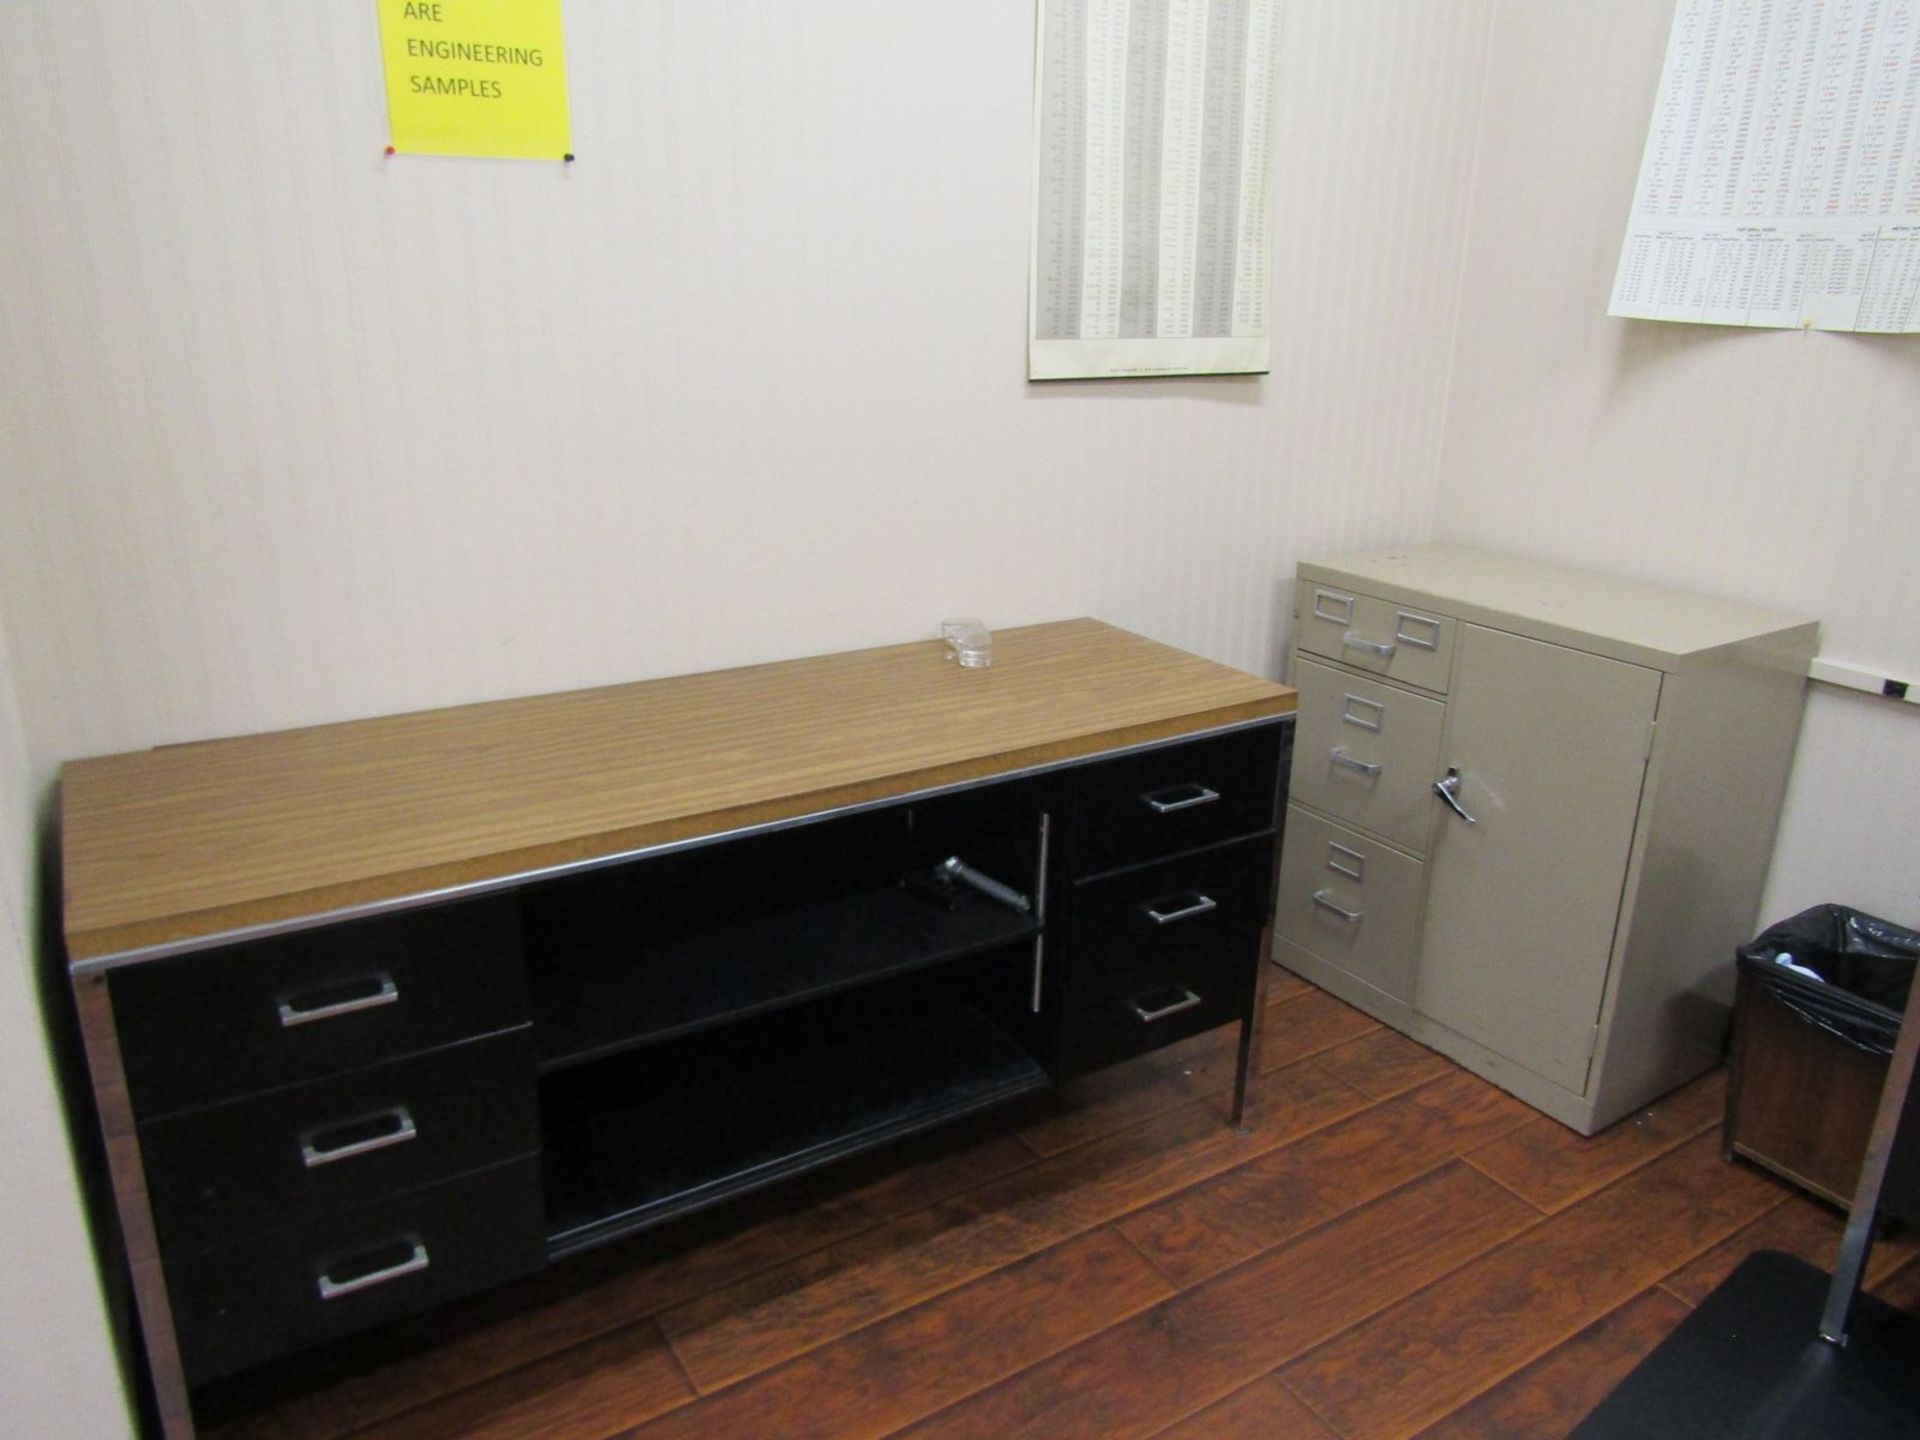 Lot - Contents of Office, to Include: (1) Desk, (1) Credenza, (1) Chair, & (1) Filing Cabinet w/ - Image 2 of 2